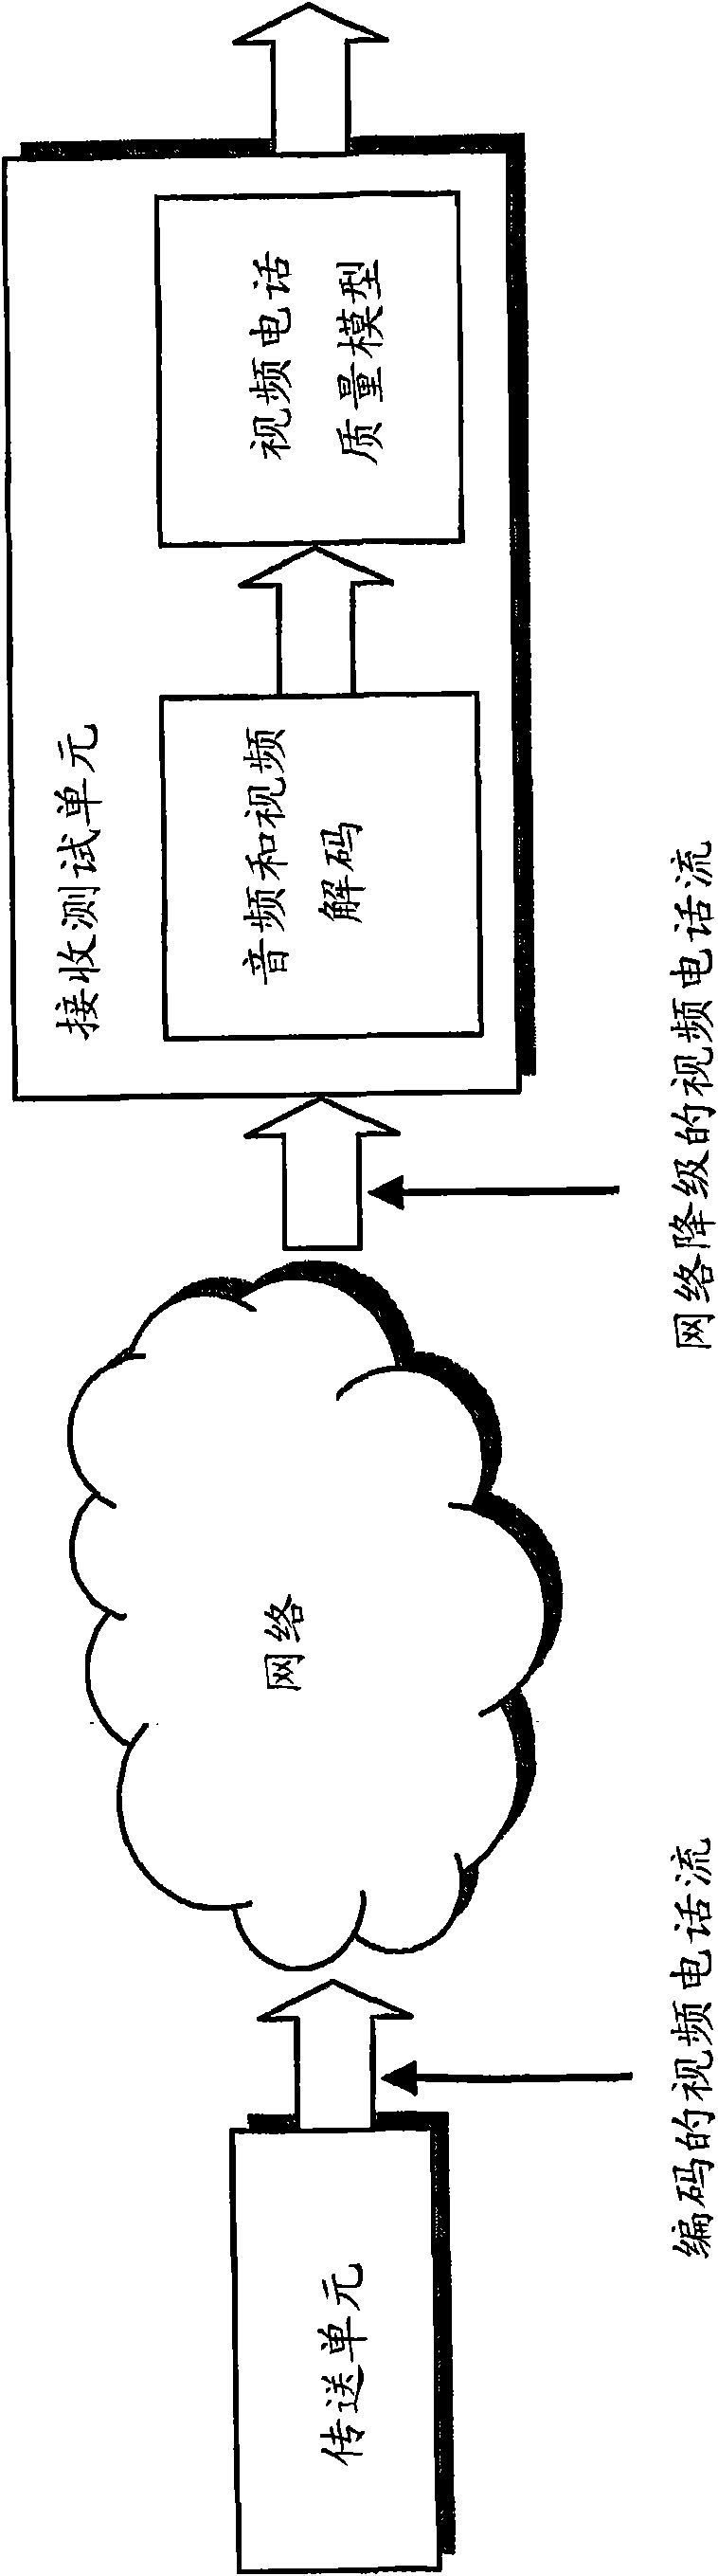 Method and arrangement for video telephony quality assessment